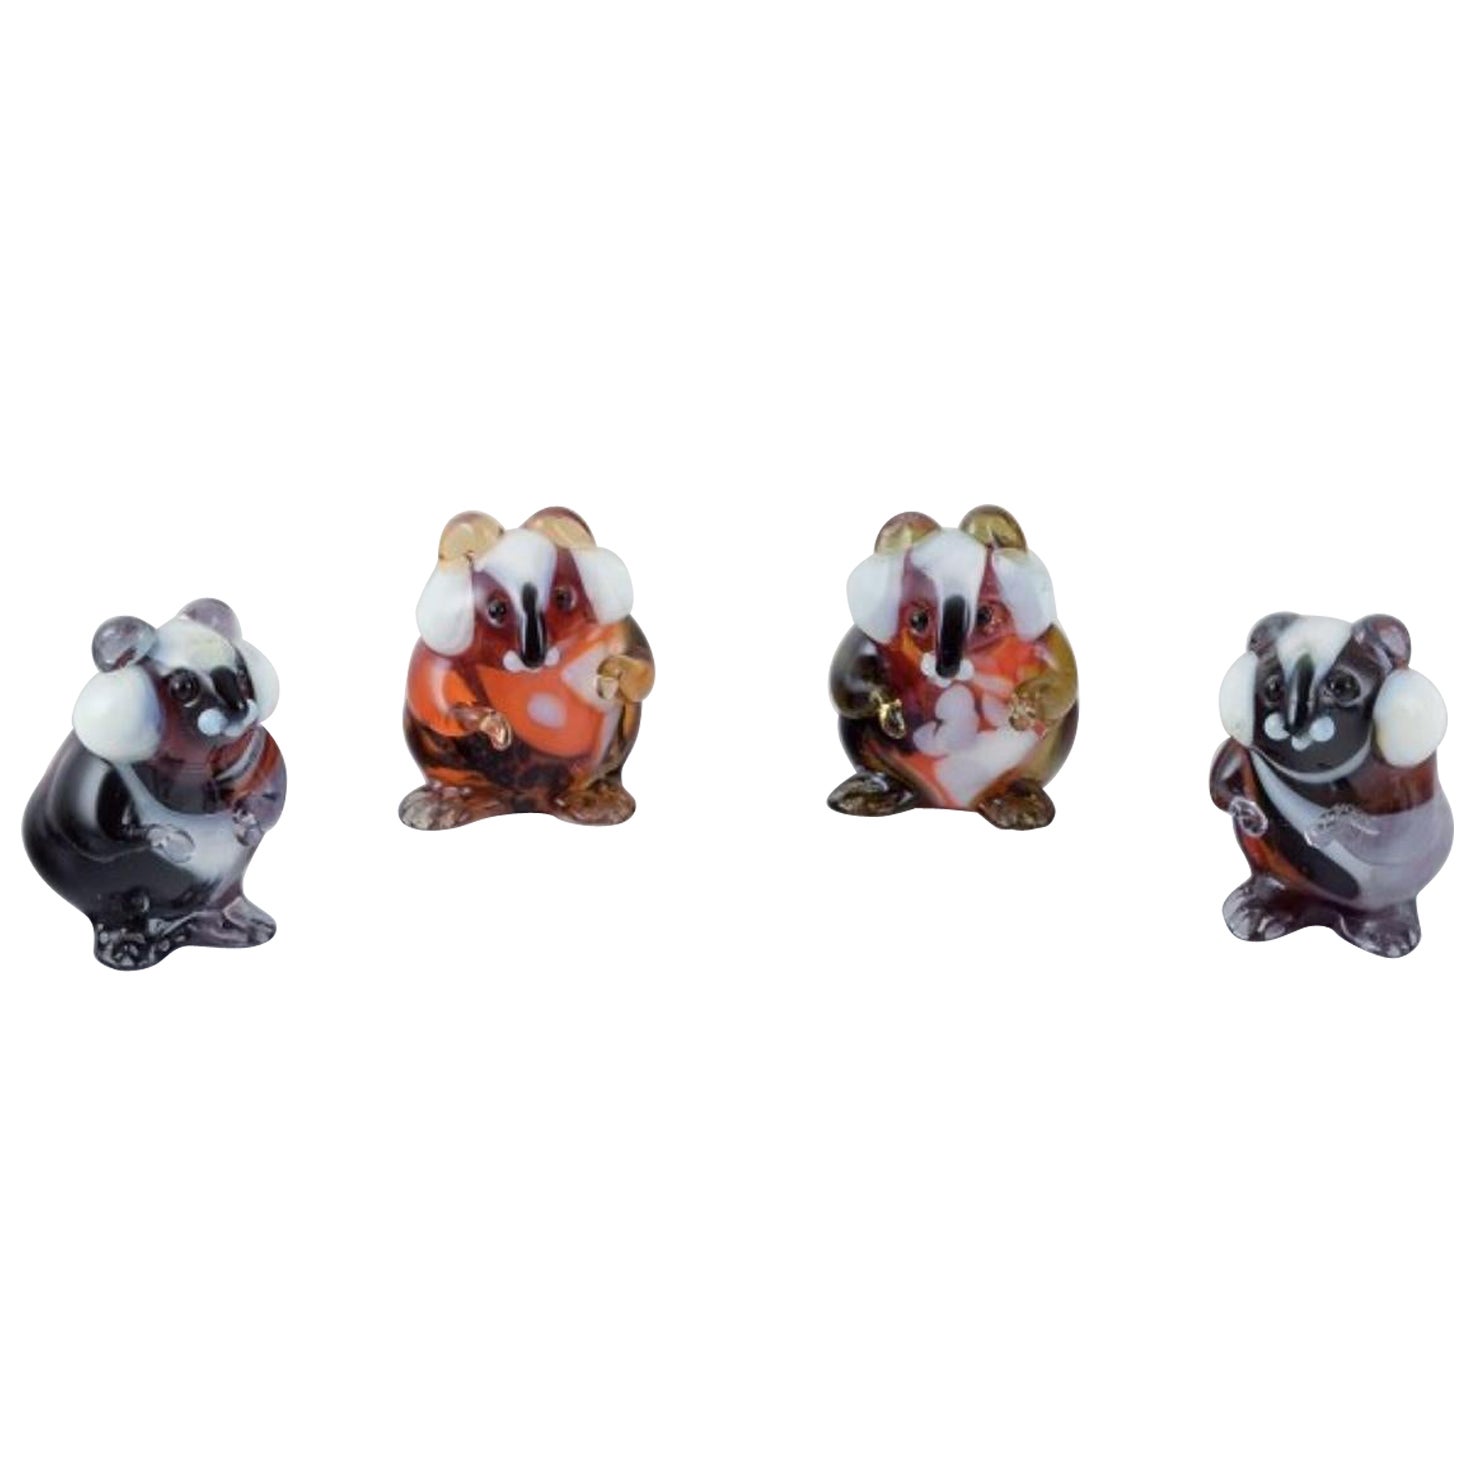 Murano, Italy. A collection of four miniature glass rodent figurines. For Sale